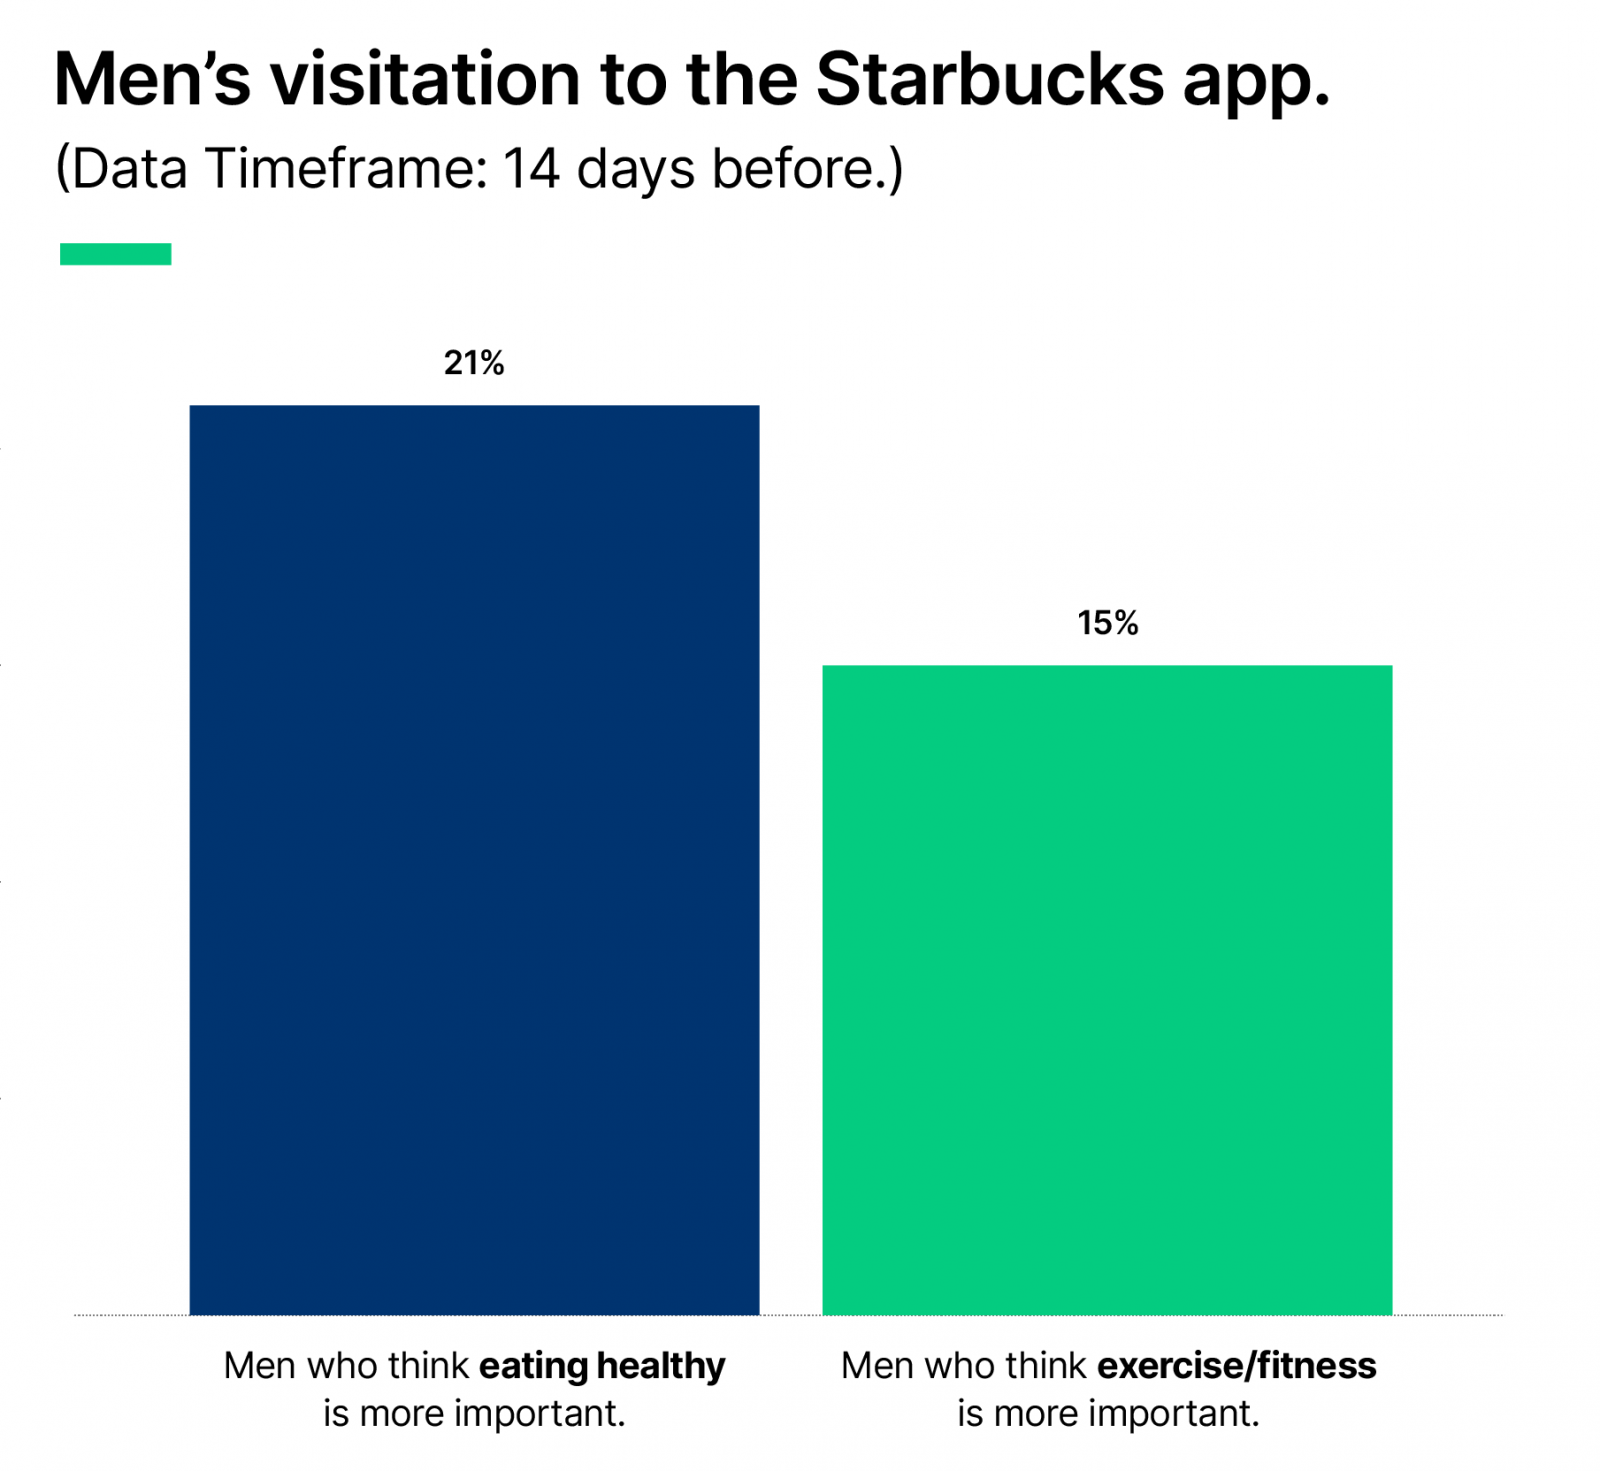 Men's visitation to Starbucks differs based on their focus on healthy eating.